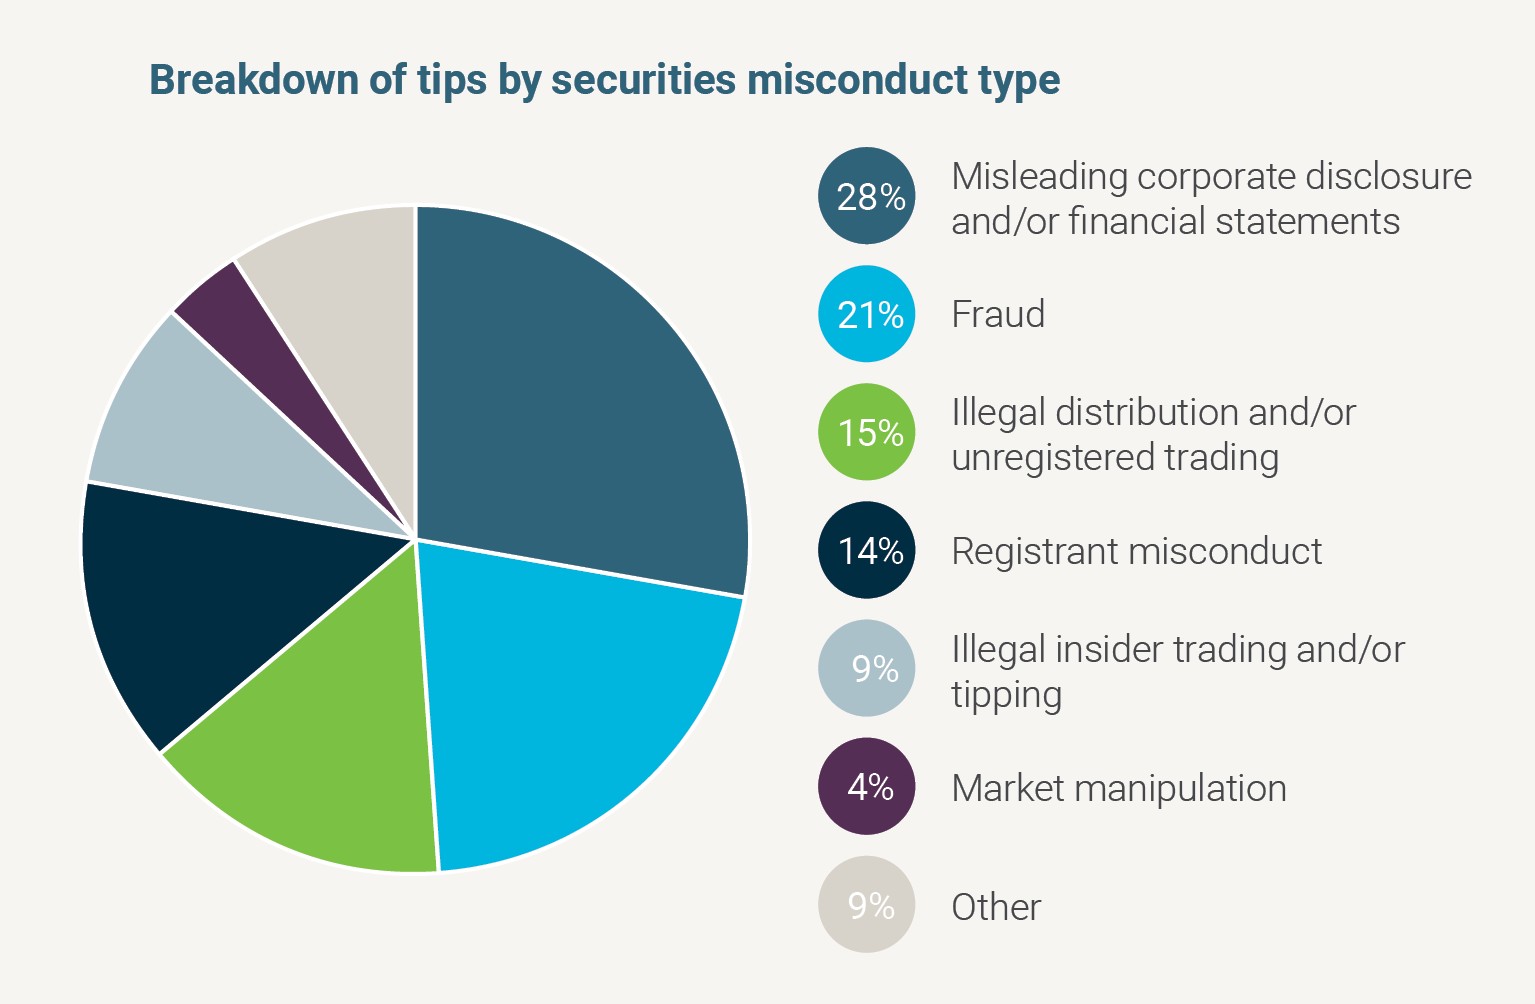 A pie chart showing the breakdown of tips by securities misconduct type. The breakdown is:  28% misleading corporate disclosure and/or financial statements, 21% fraud, 15% illegal distribution and/or unregistered trading, 14% registrant misconduct, 9% illegal insider trading and/or tipping, 4% market manipulation, and 9% other.